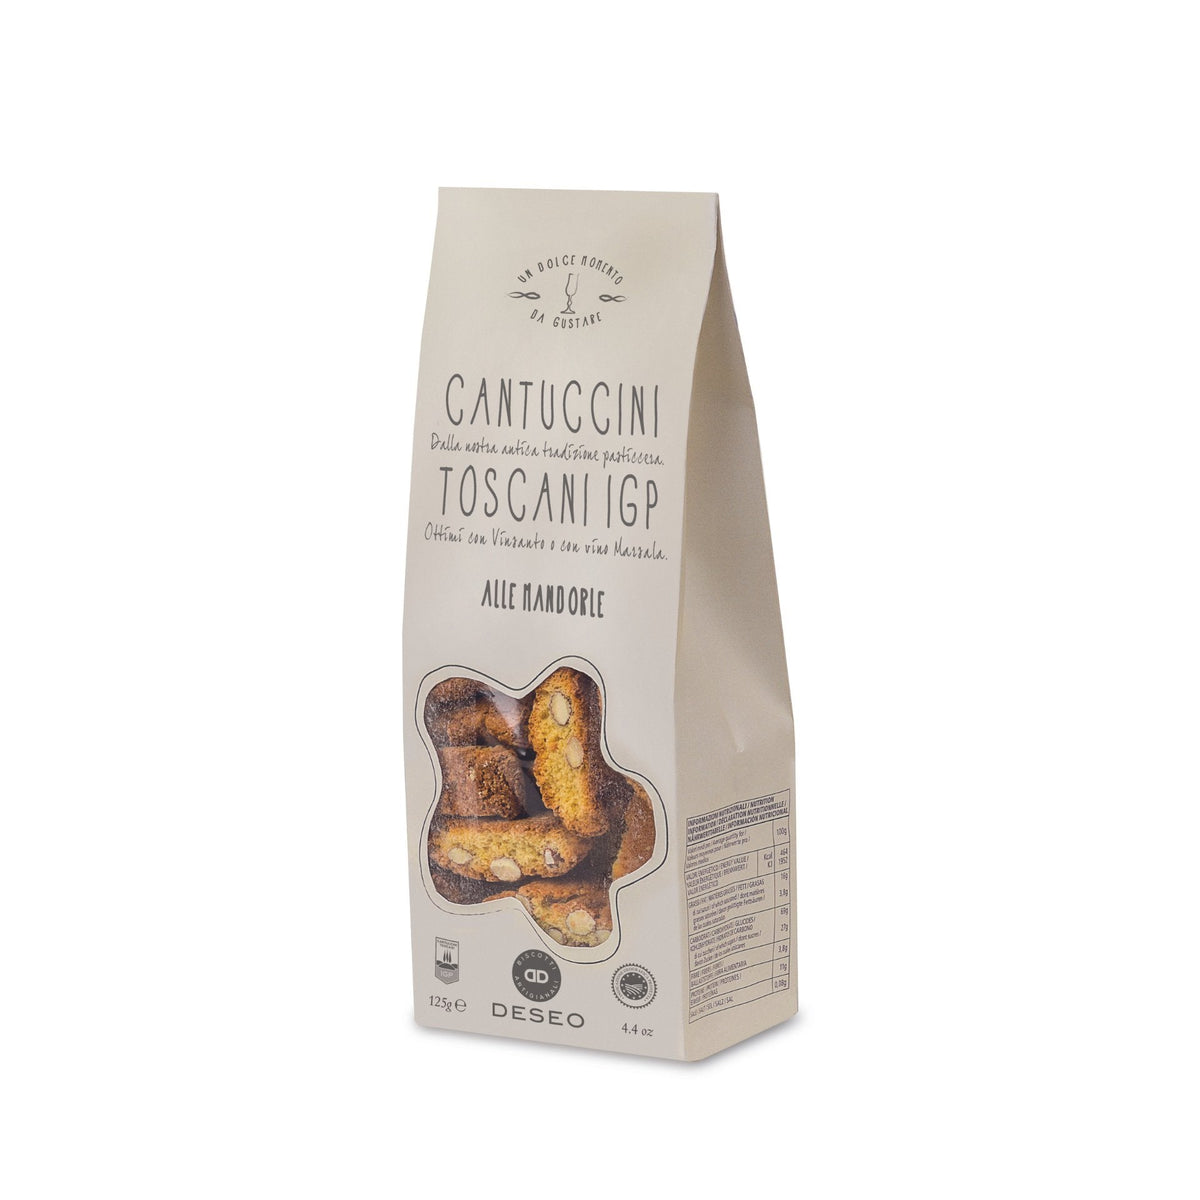 Deseo Cantuccini Toscani PGI with Almonds 125g (Bag)  | Imported and distributed in the UK by Just Gourmet Foods